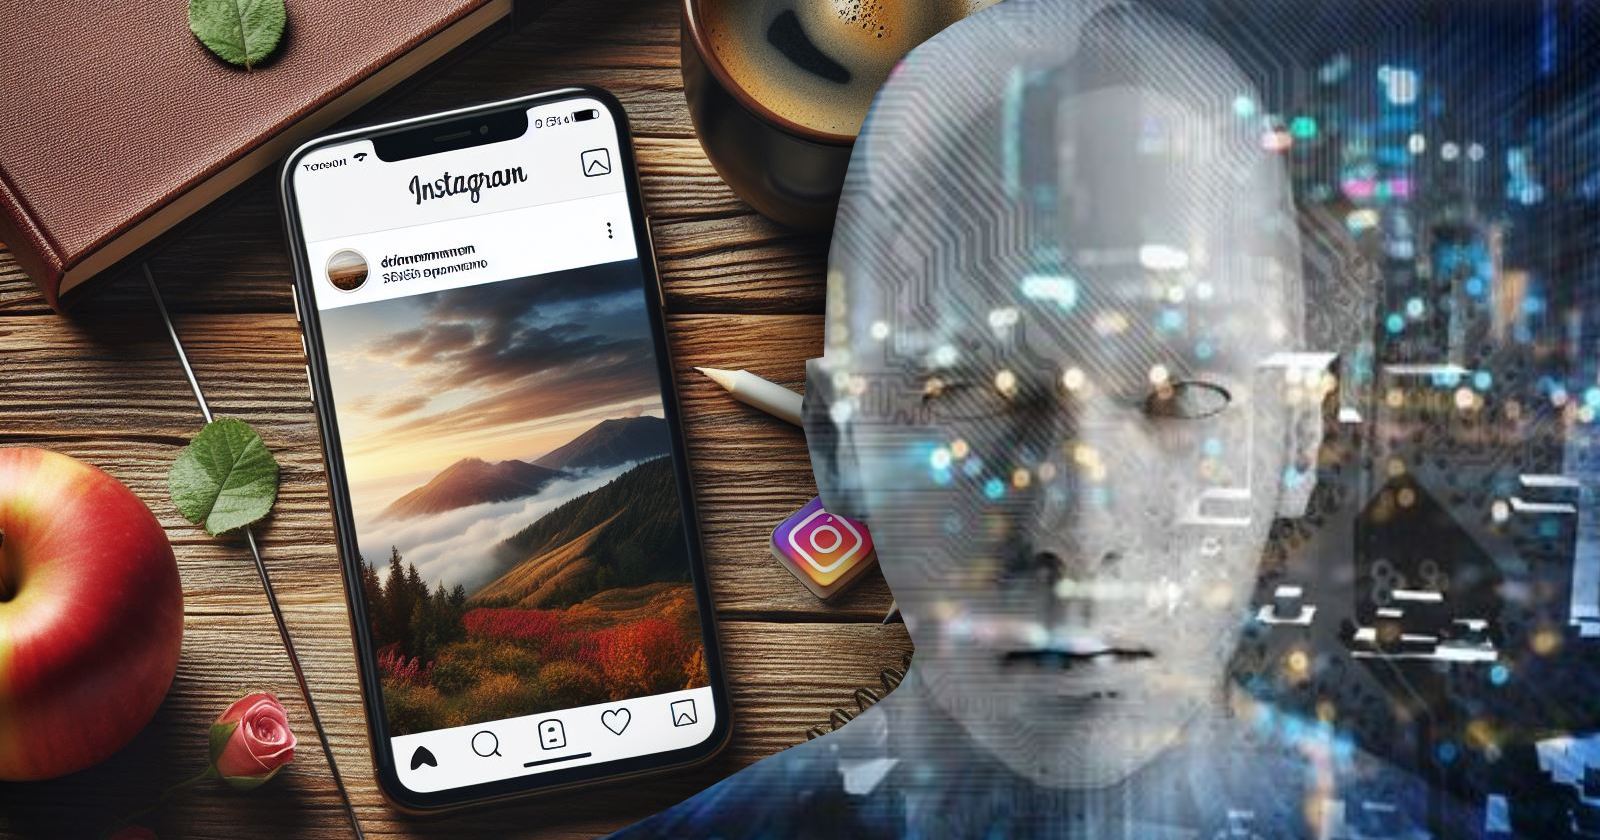 Instagram Gets Artificial Intelligence! But How?